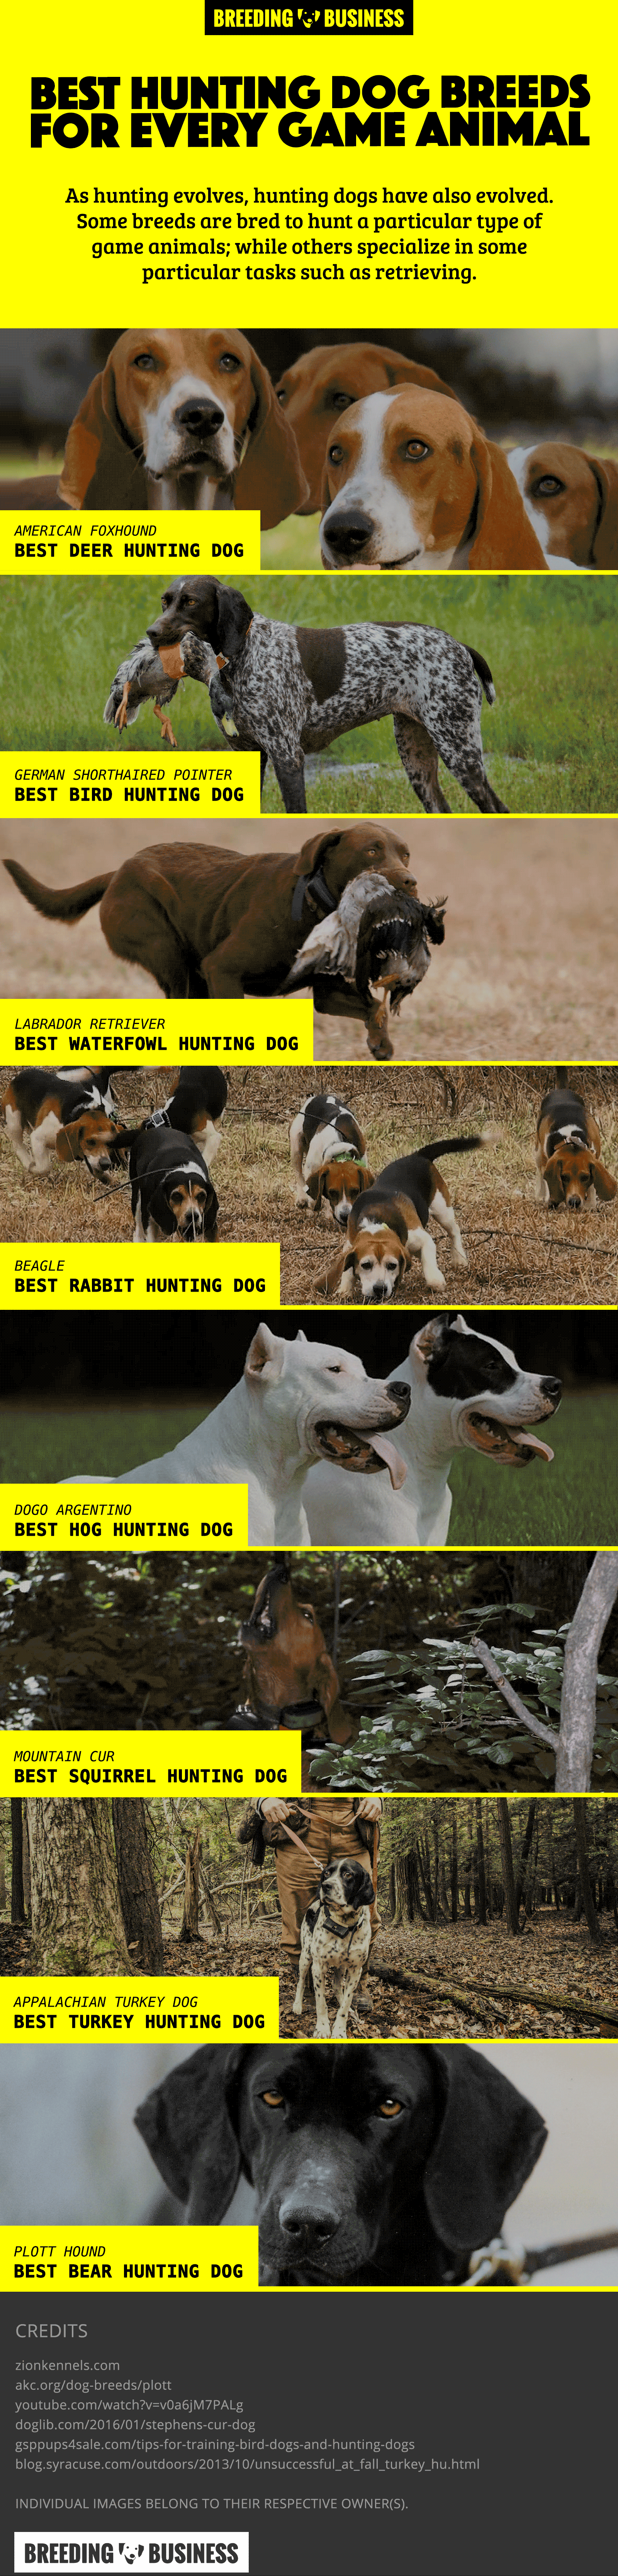 best hunting dogs for families